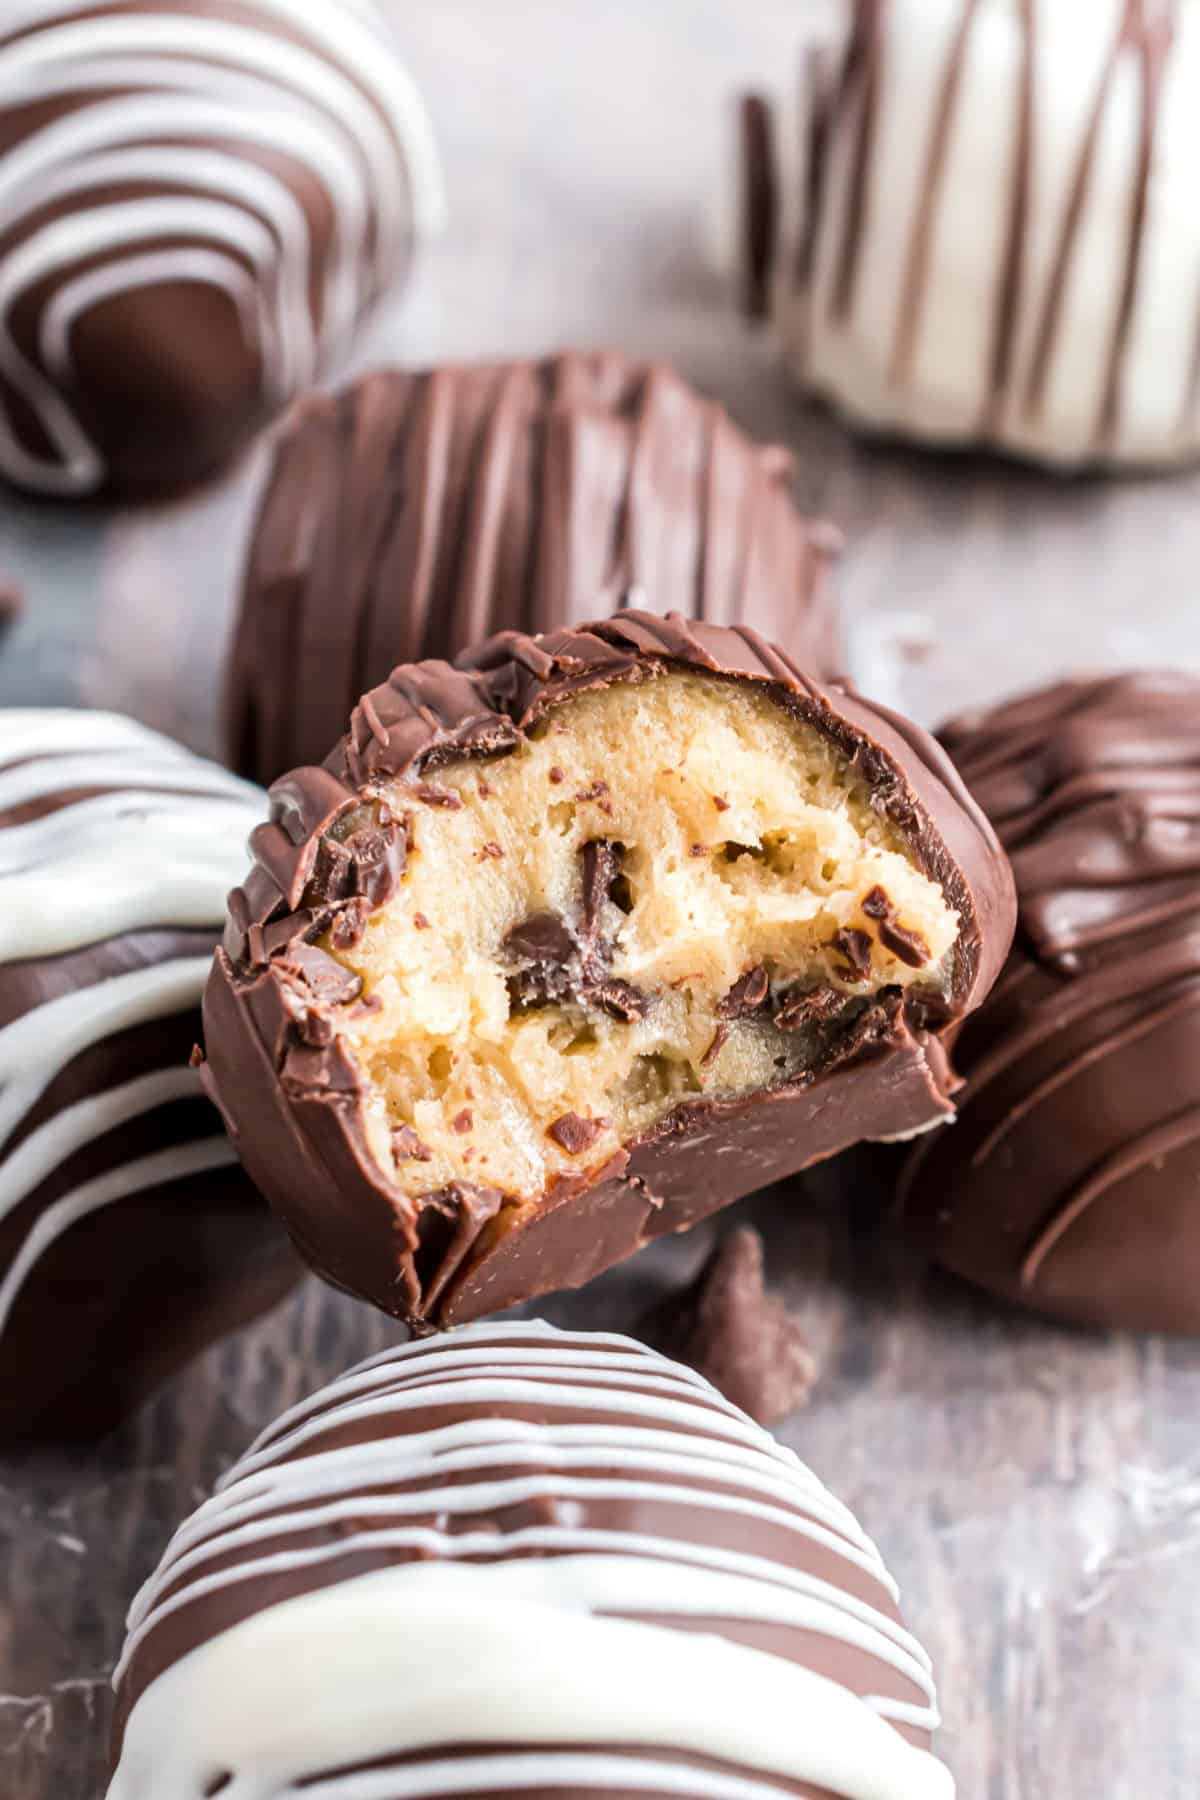 Cookie dough truffles dipped in chocolate with a bite taken.